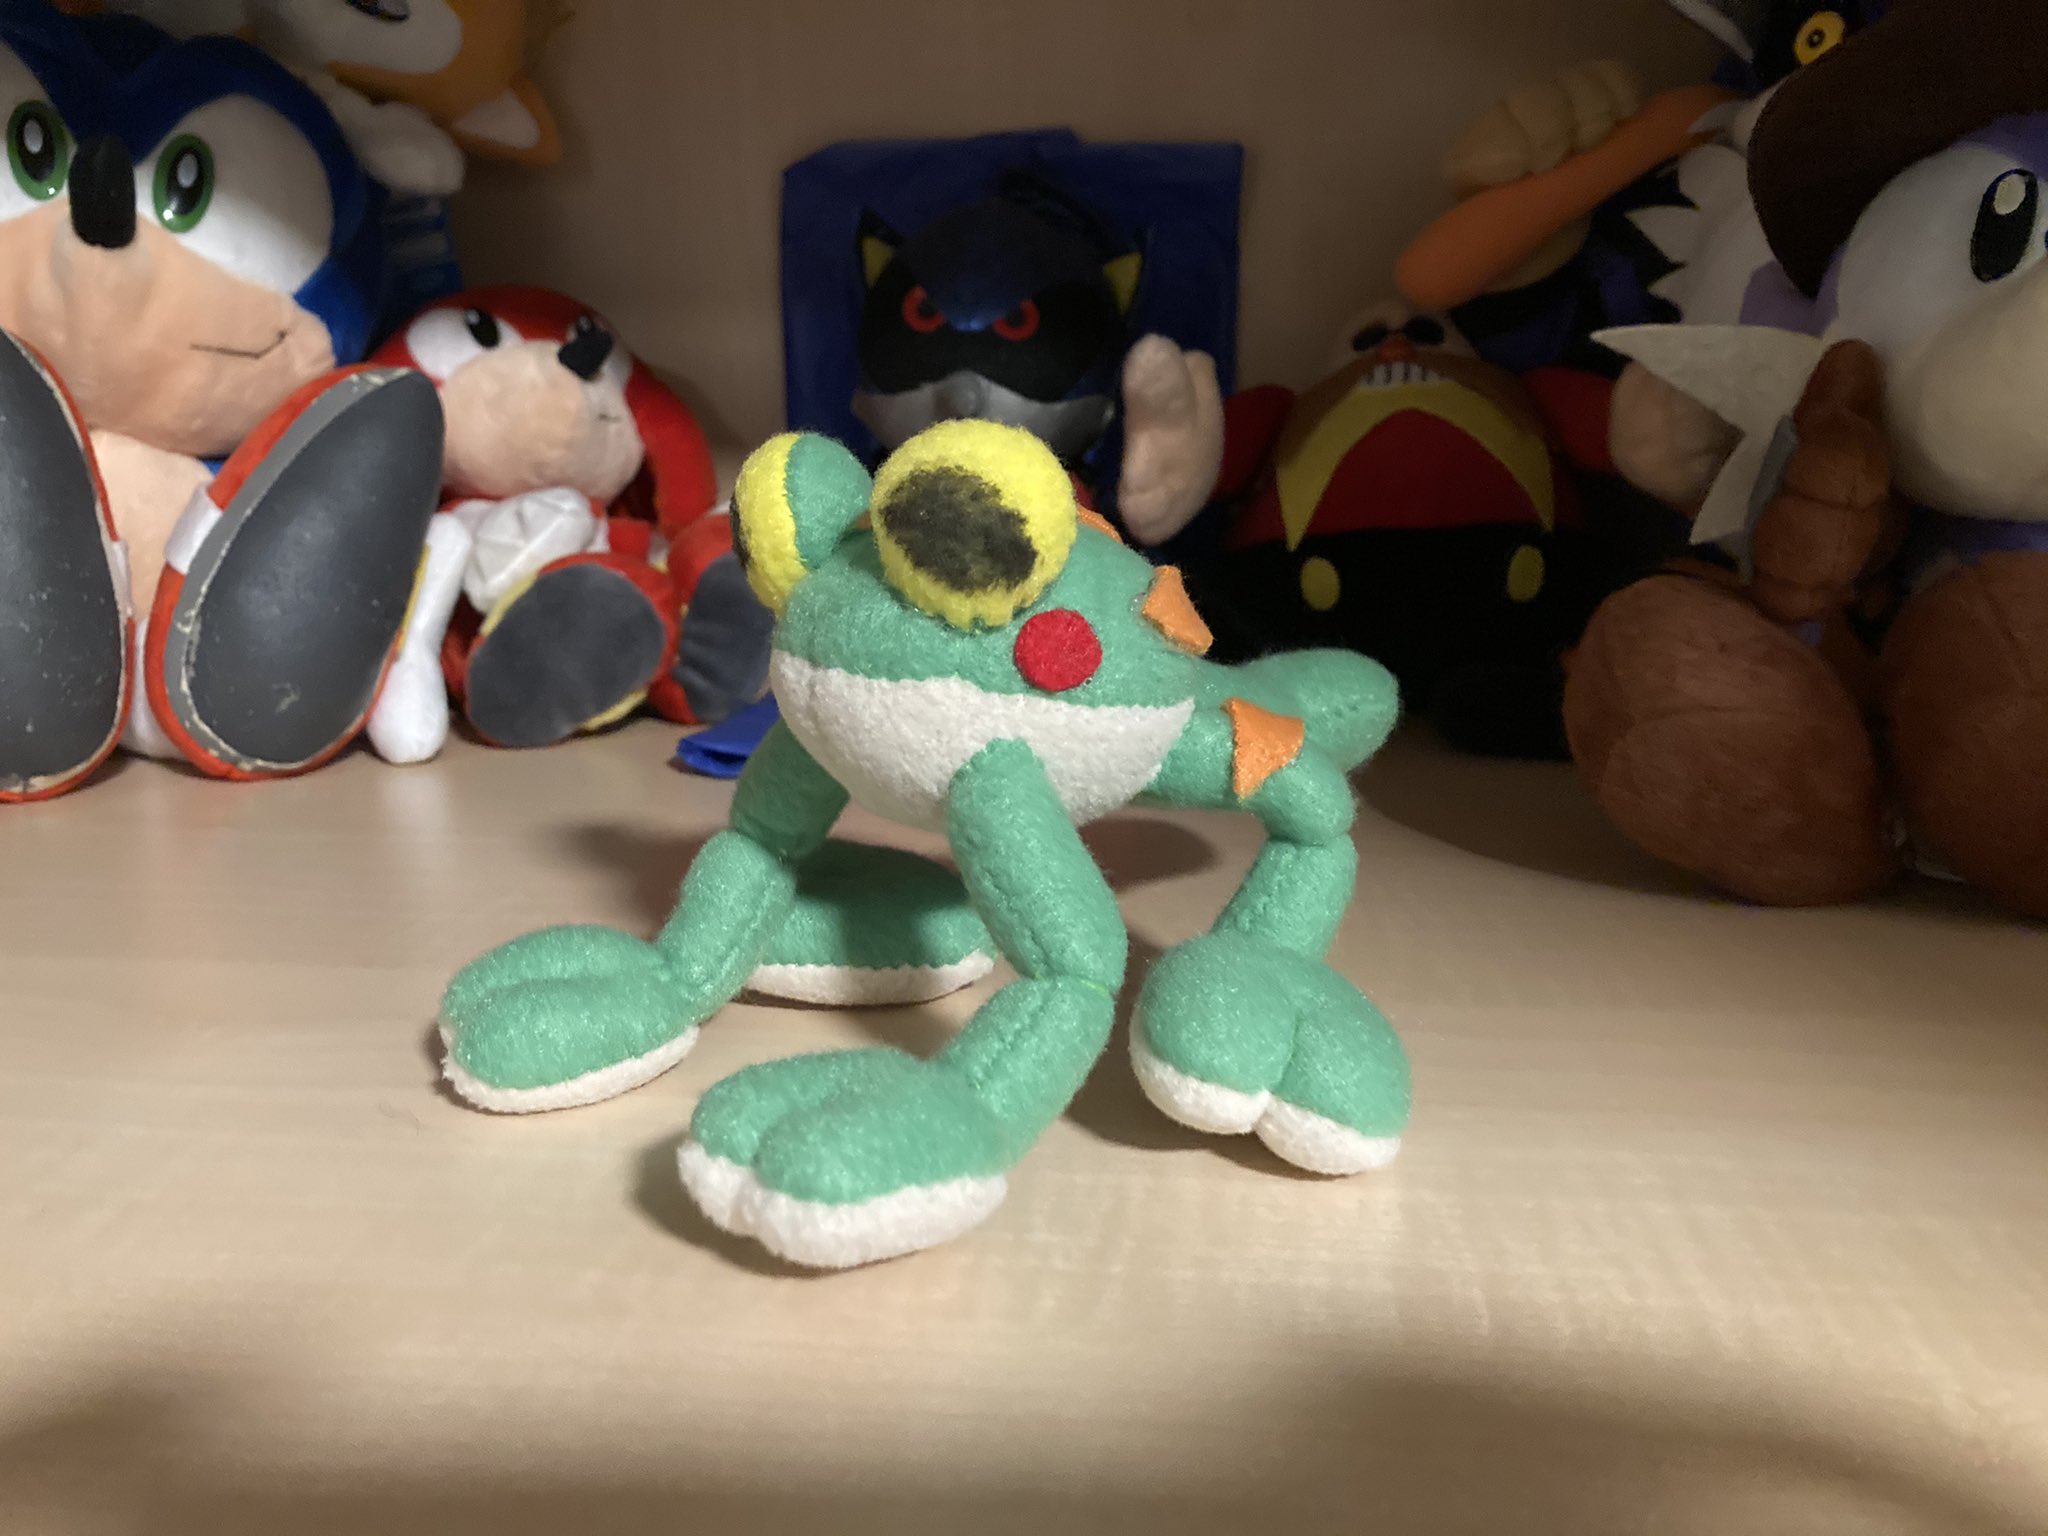 SomethingSonicRelated on X: Froggy Plush. Yup, that's the